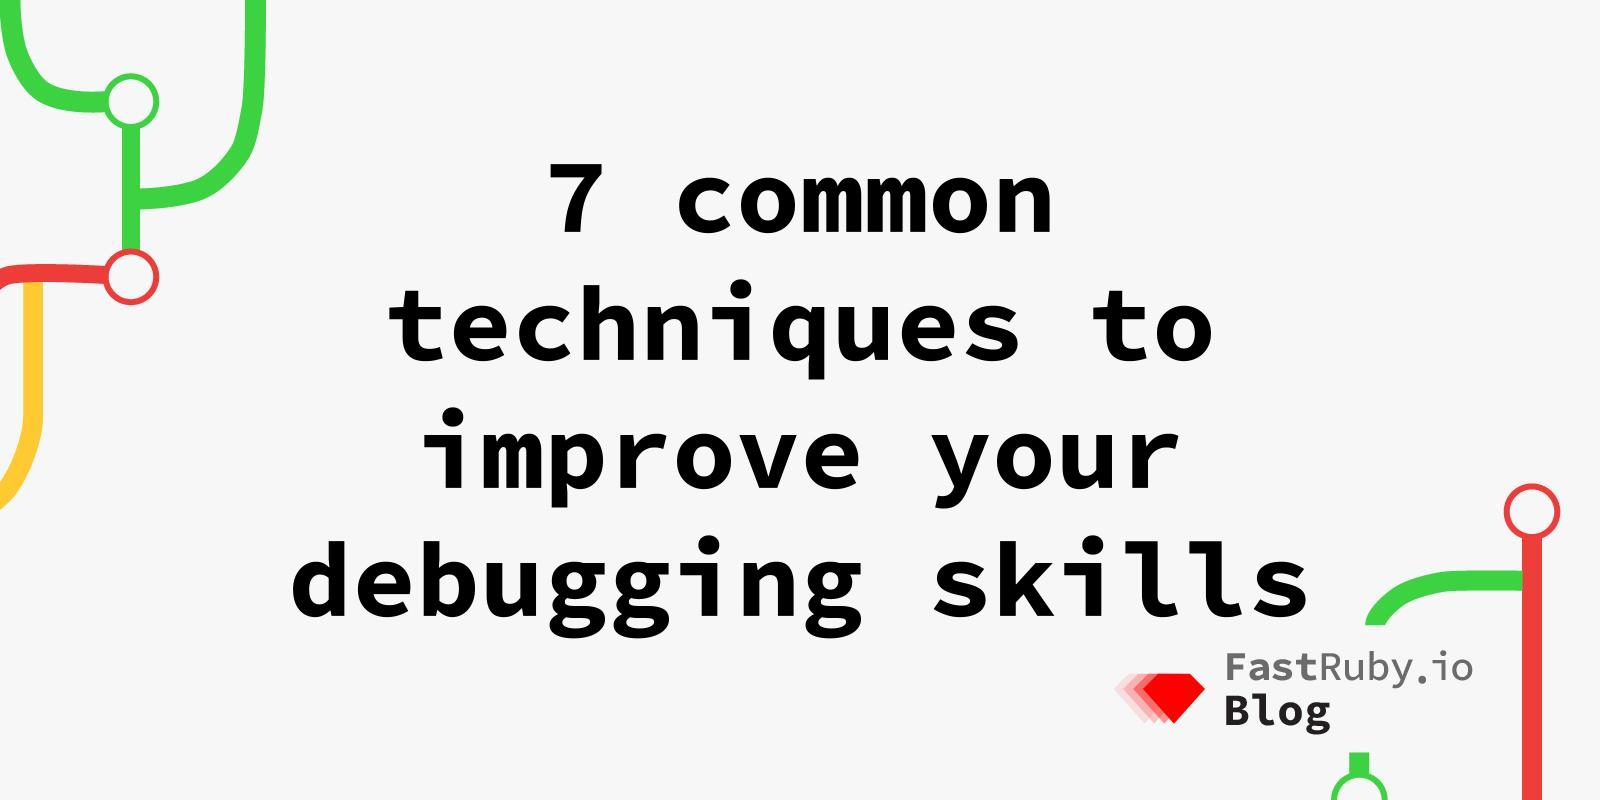 7 common techniques to improve your debugging skills